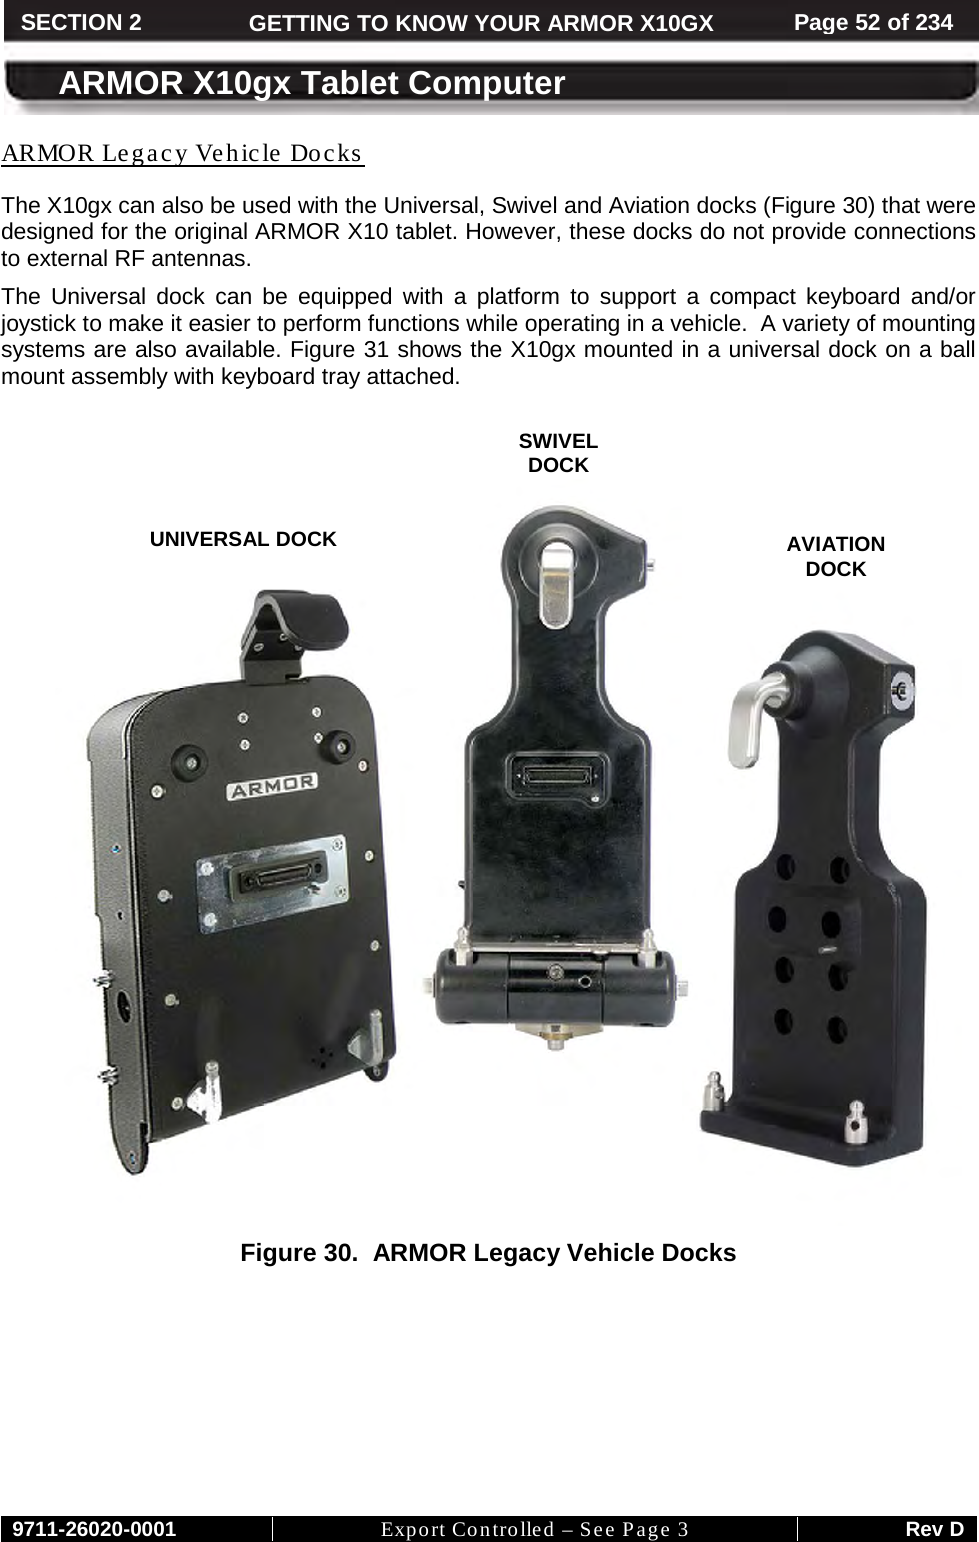     9711-26020-0001 Export Controlled – See Page 3 Rev D SECTION 2 GETTING TO KNOW YOUR ARMOR X10GX Page 52 of 234  ARMOR X10gx Tablet Computer The X10gx can also be used with the Universal, Swivel and Aviation docks (ARMOR Legacy Vehicle Docks Figure 30) that were designed for the original ARMOR X10 tablet. However, these docks do not provide connections to external RF antennas. The Universal dock can be equipped with a platform to support a compact keyboard and/or joystick to make it easier to perform functions while operating in a vehicle.  A variety of mounting systems are also available. Figure 31 shows the X10gx mounted in a universal dock on a ball mount assembly with keyboard tray attached.     Figure 30.  ARMOR Legacy Vehicle Docks  UNIVERSAL DOCK AVIATION  DOCK SWIVEL  DOCK   